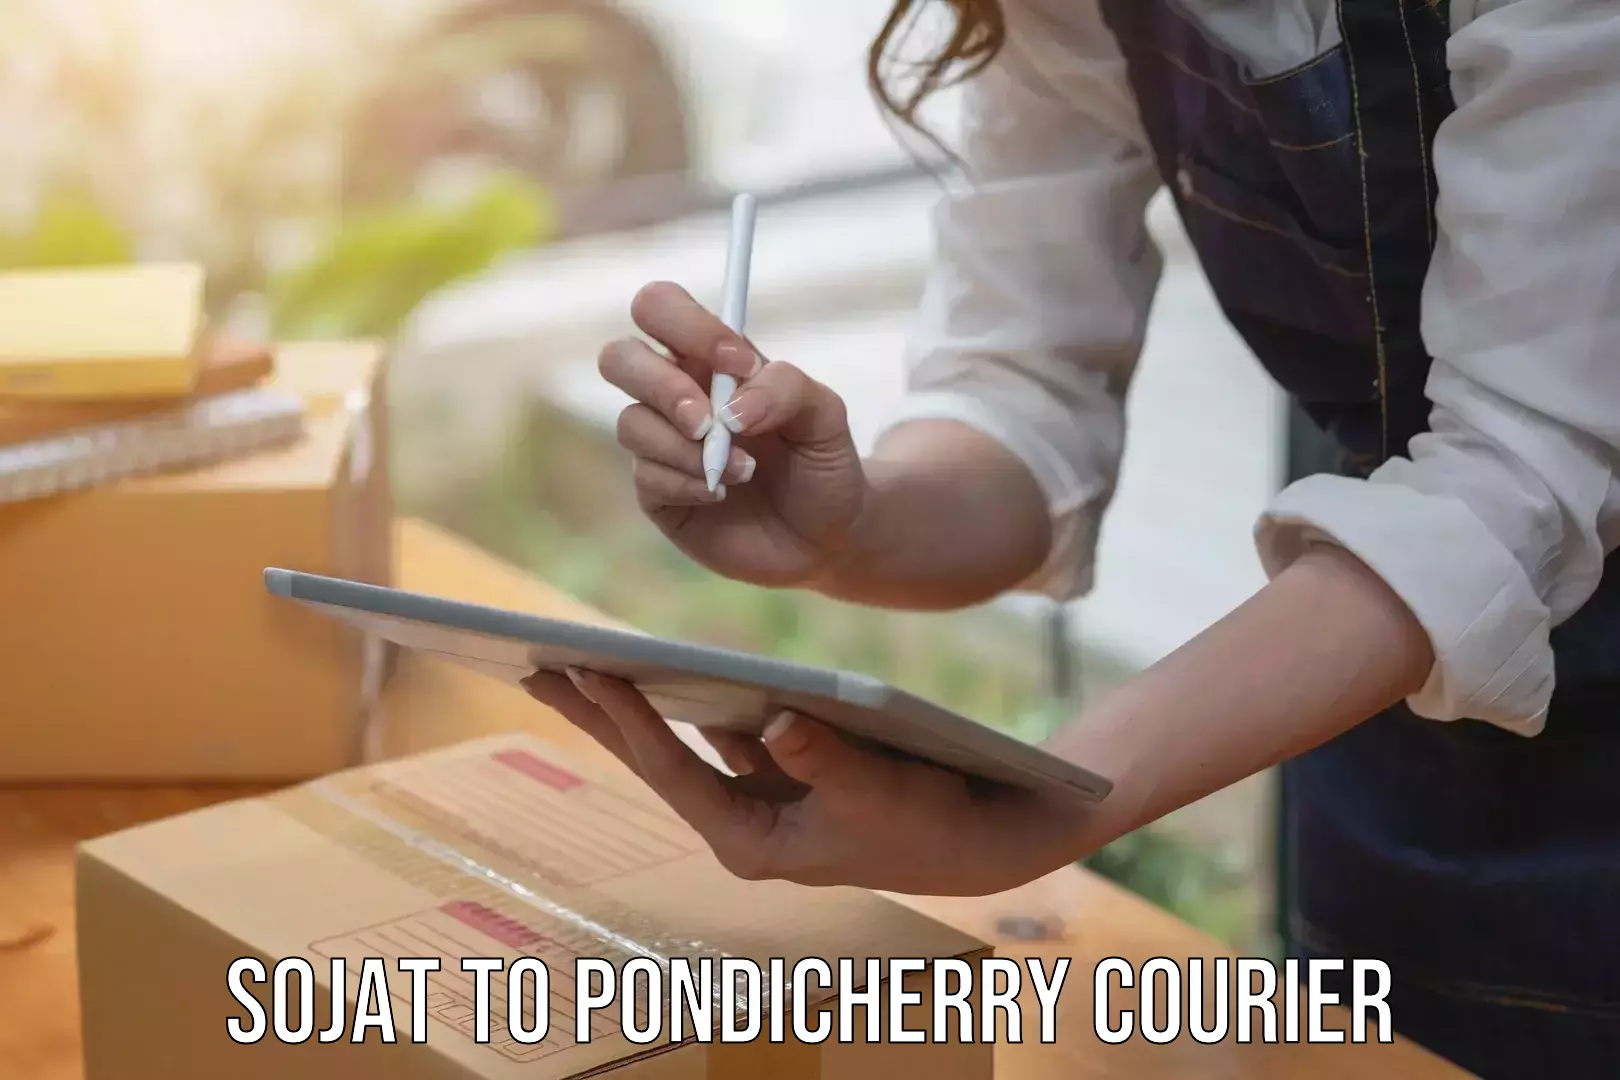 User-friendly delivery service in Sojat to Pondicherry